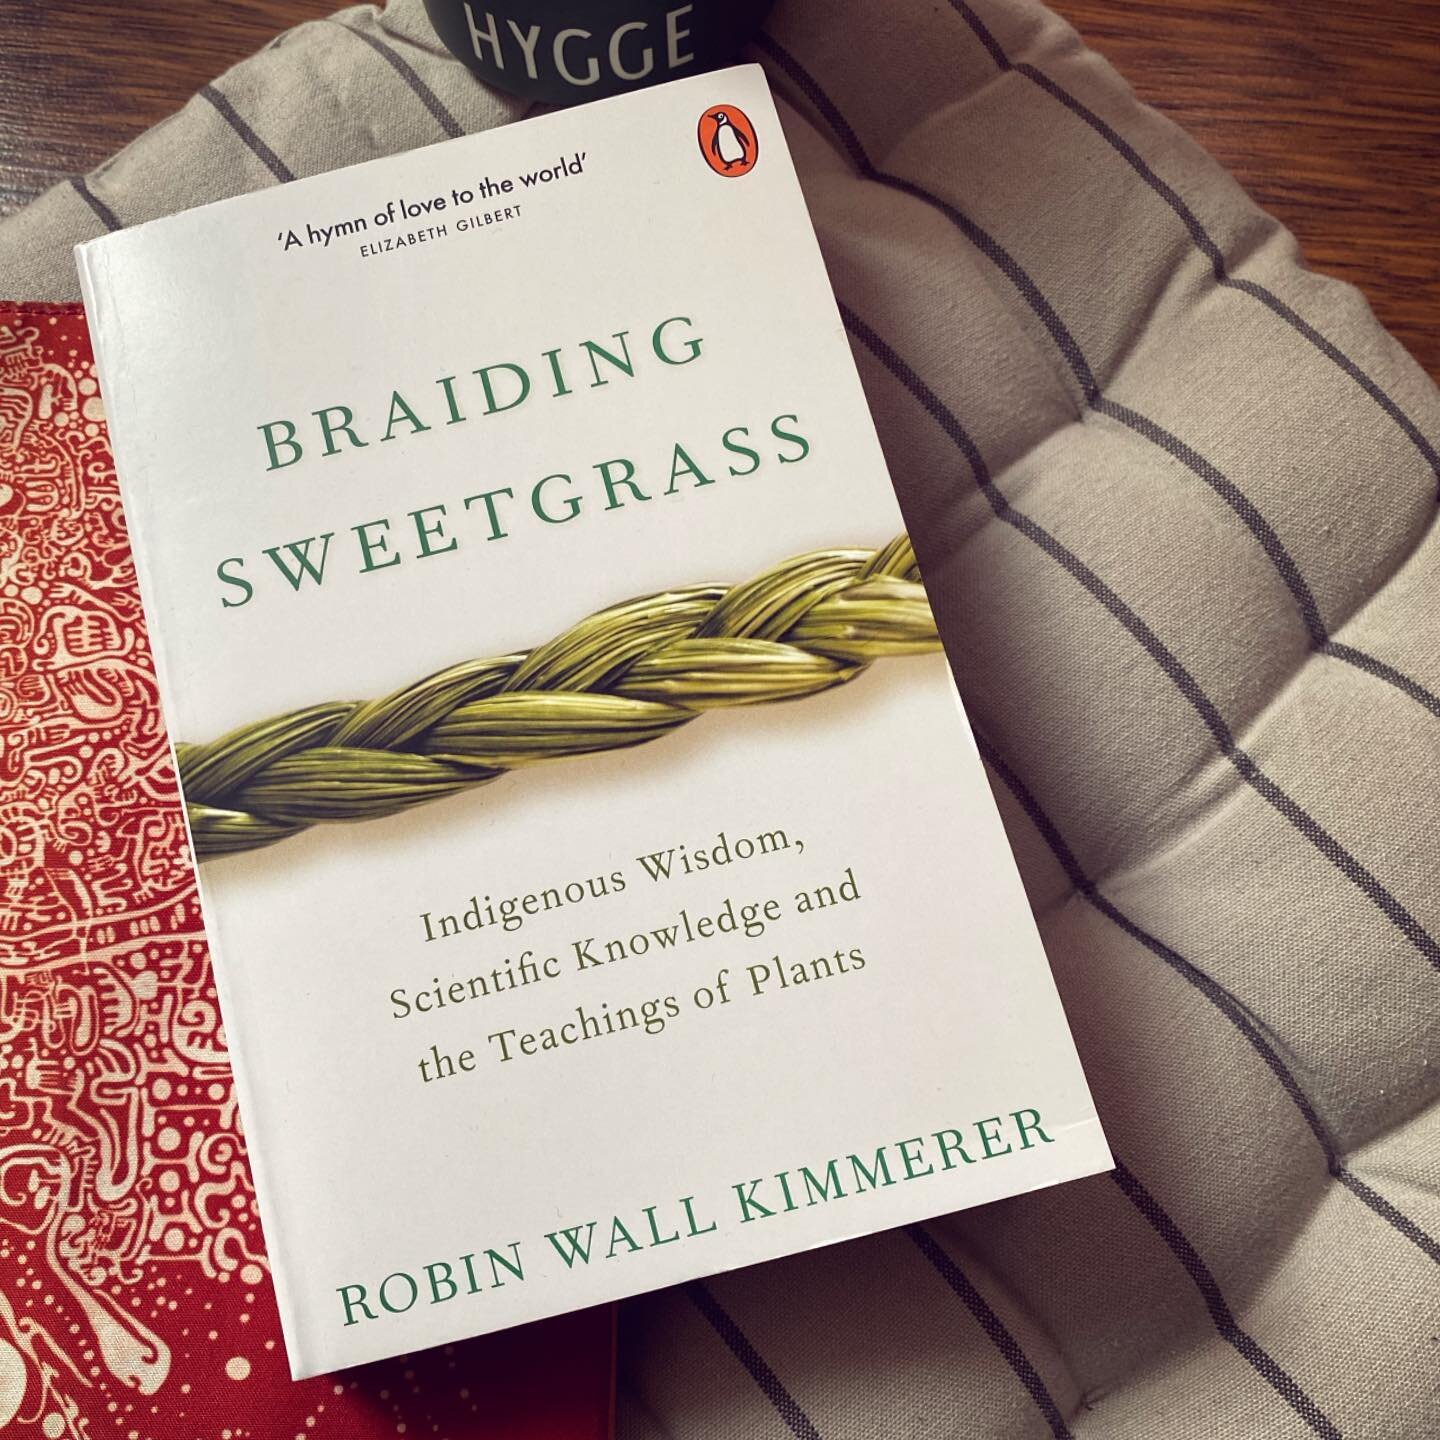 #onebookamonth I finally found my book for May, and it&rsquo;s a recent classic! @braiding_sweetgrass has written a book that combines indigenous knowledge with scientific insights. A timely read at a time in which we lose biodiversity at unprecedent